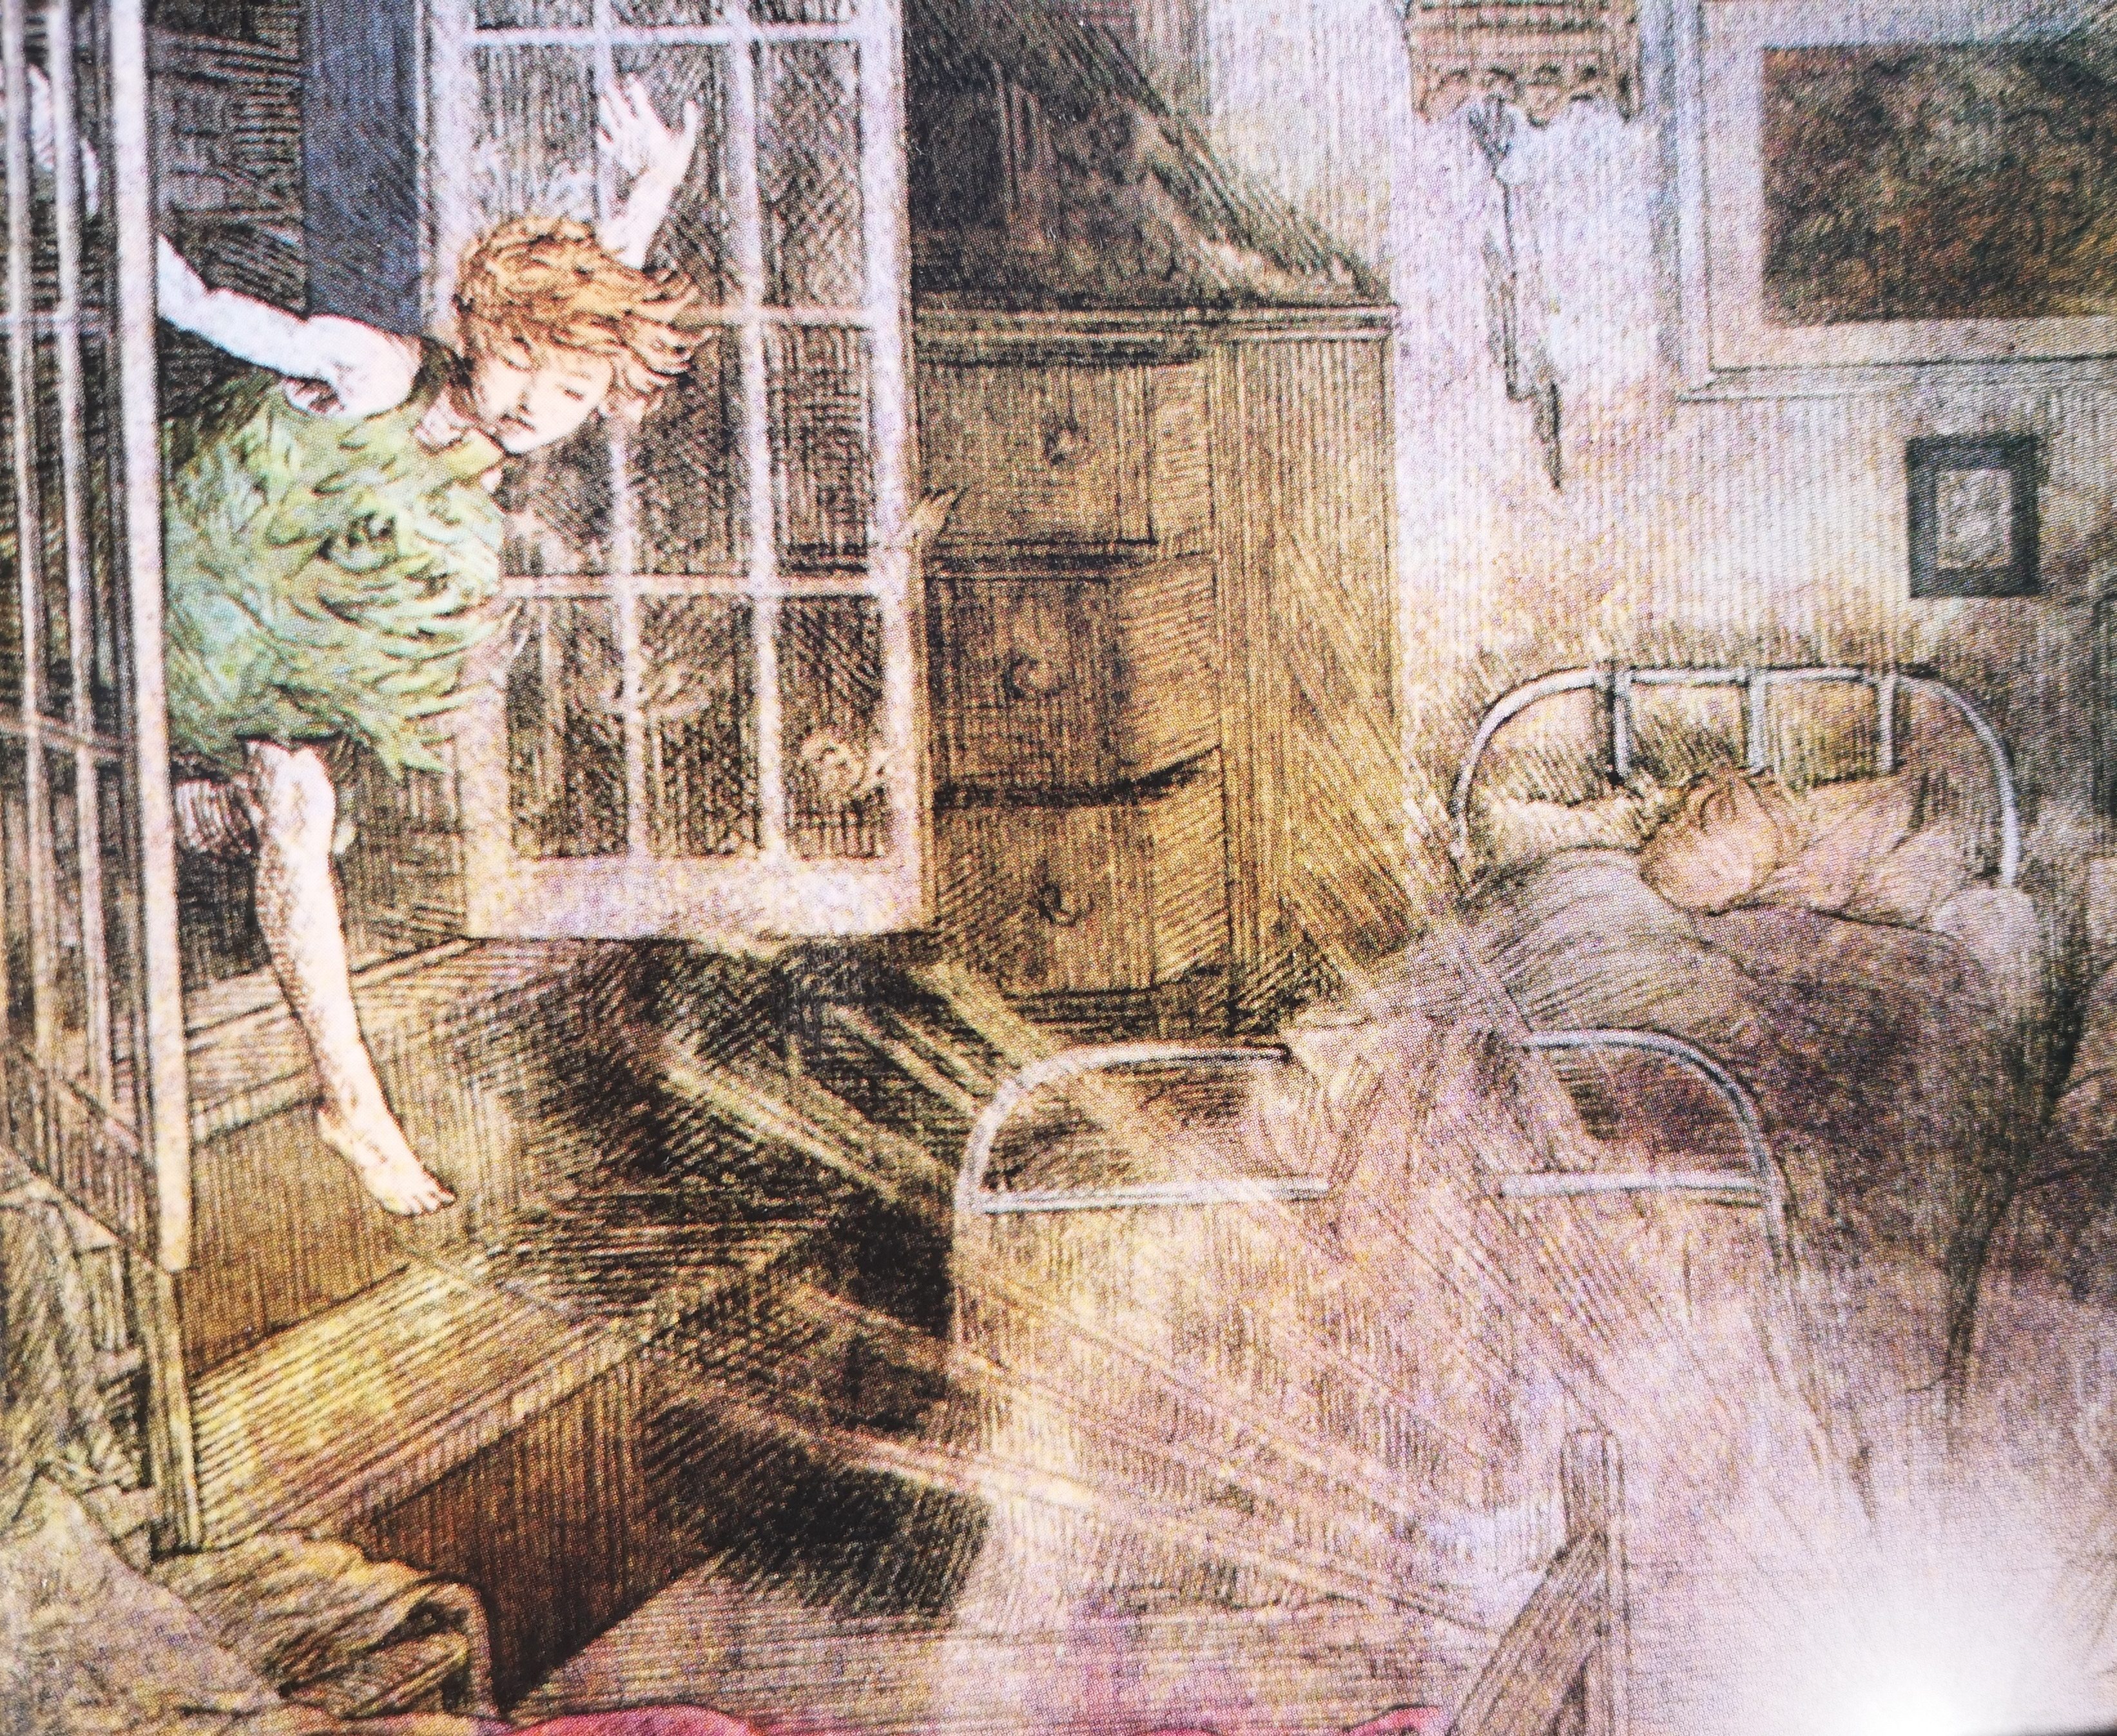 An illustration of Peter Pan climbing through a window into a sleeping child's bedroom. A bright light shines in the corner of the room.